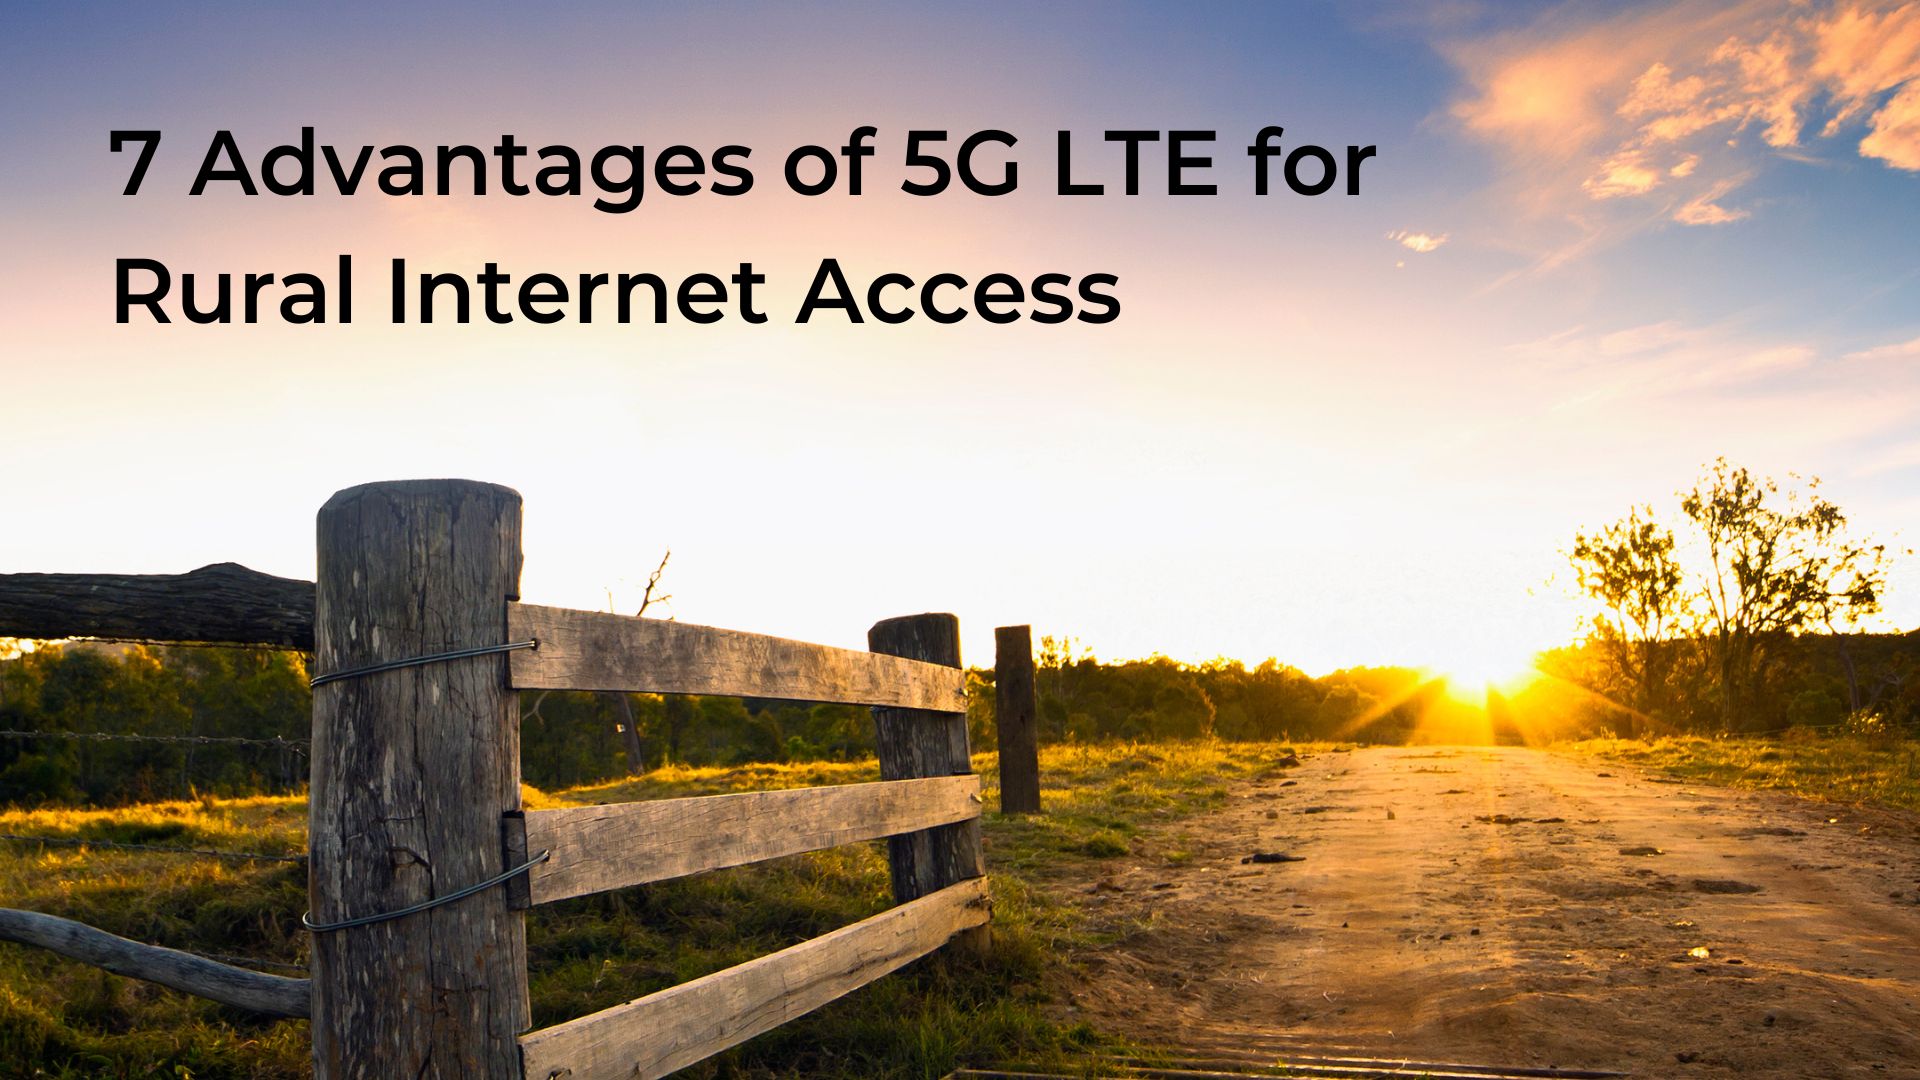 You are currently viewing 7 Advantages of 5G LTE for Rural Internet Access